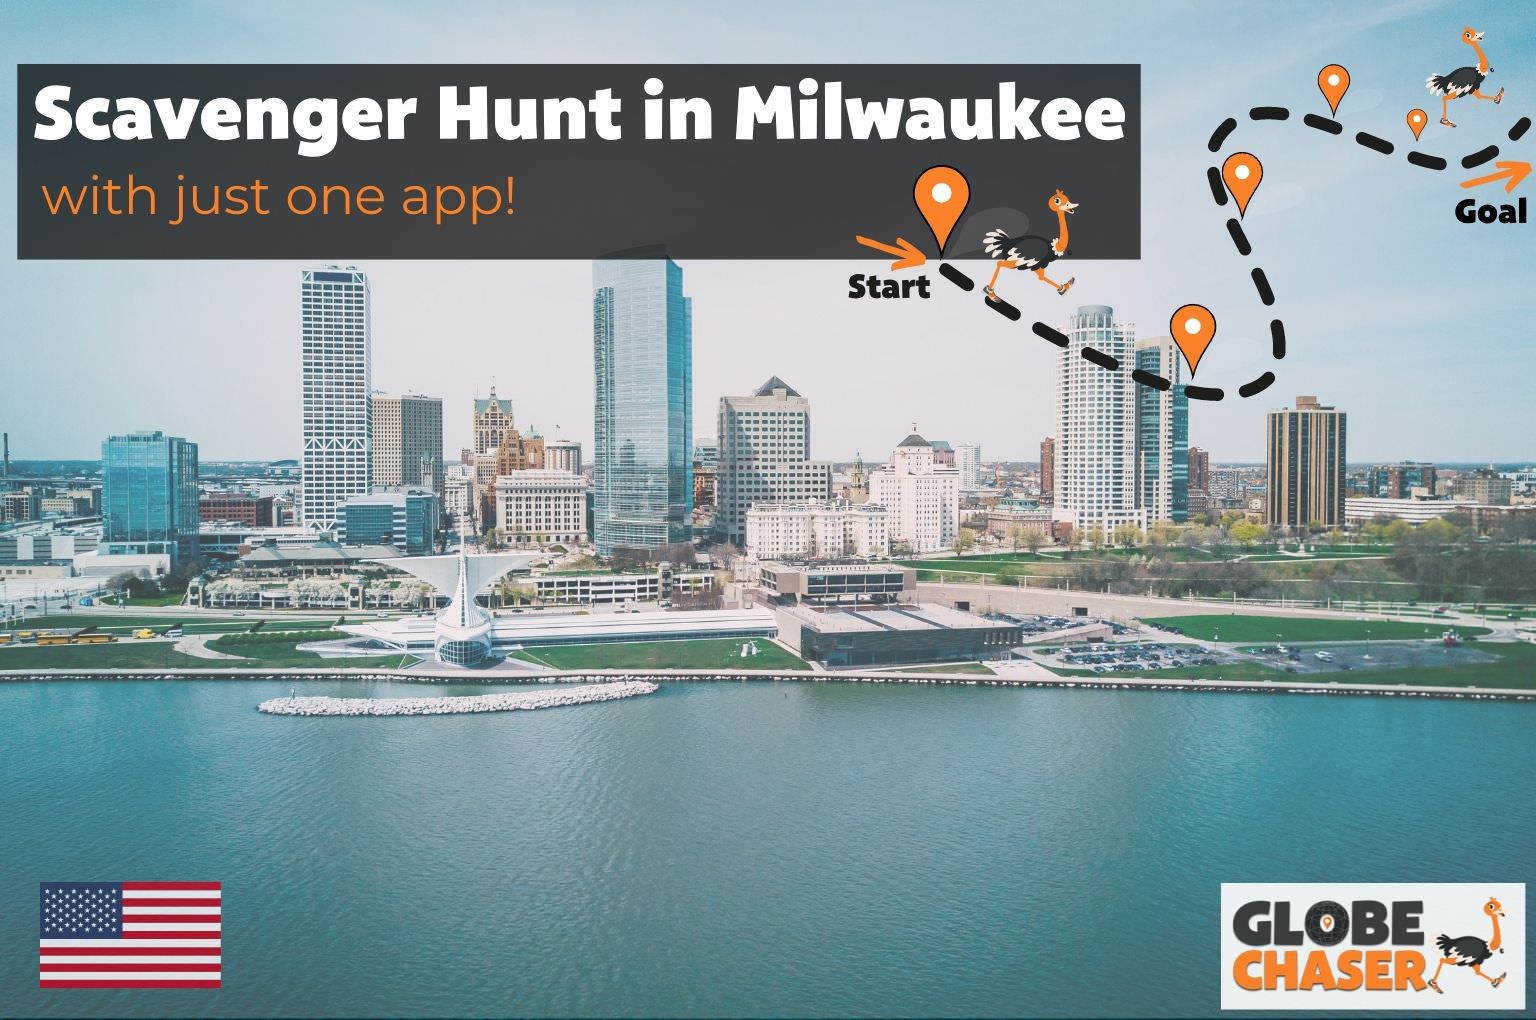 Scavenger Hunt in Milwaukee, USA - Family Activities with the Globe Chaser App for Outdoor Fun